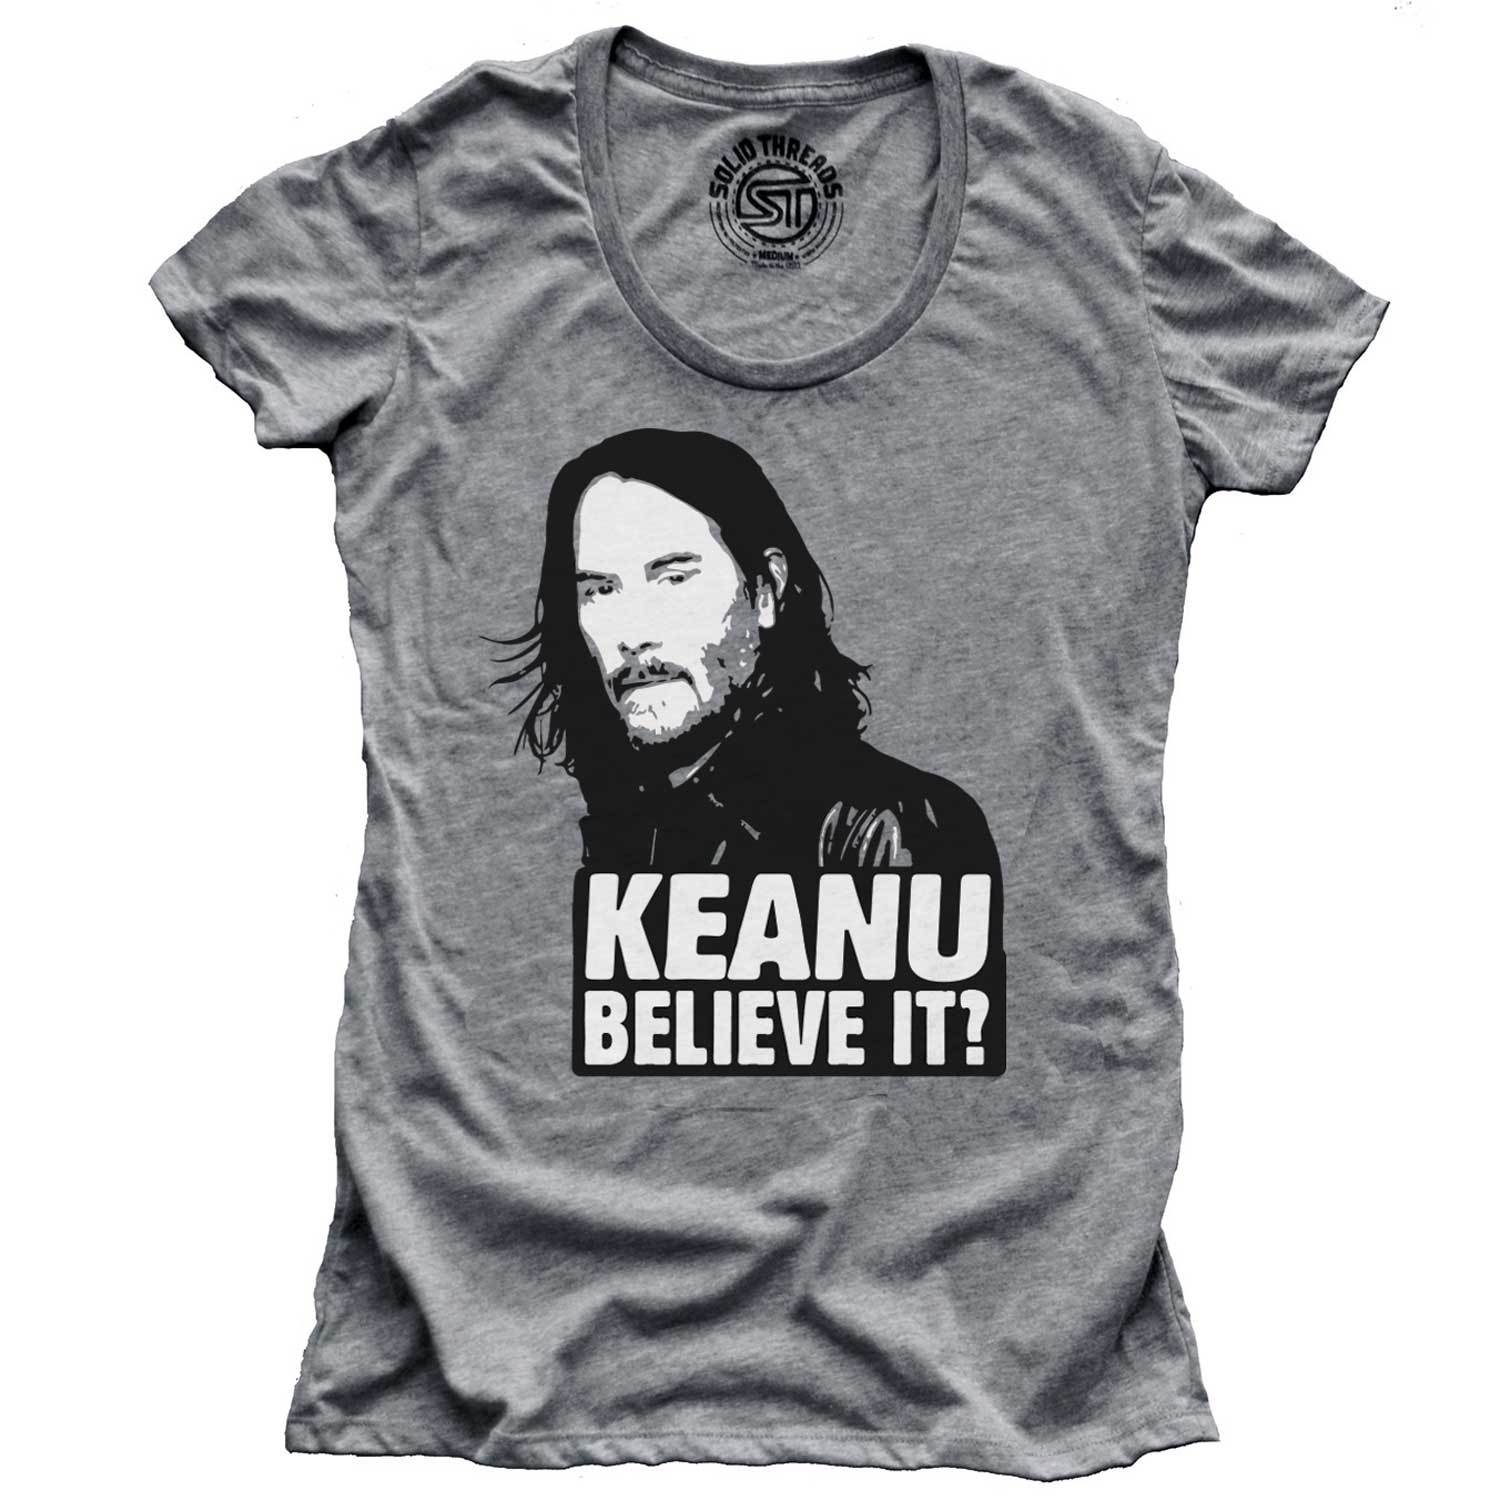 Women's Keanu Believe It? Vintage Heartthrob Graphic T-Shirt | Funny The Matrix Tee | Solid Threads